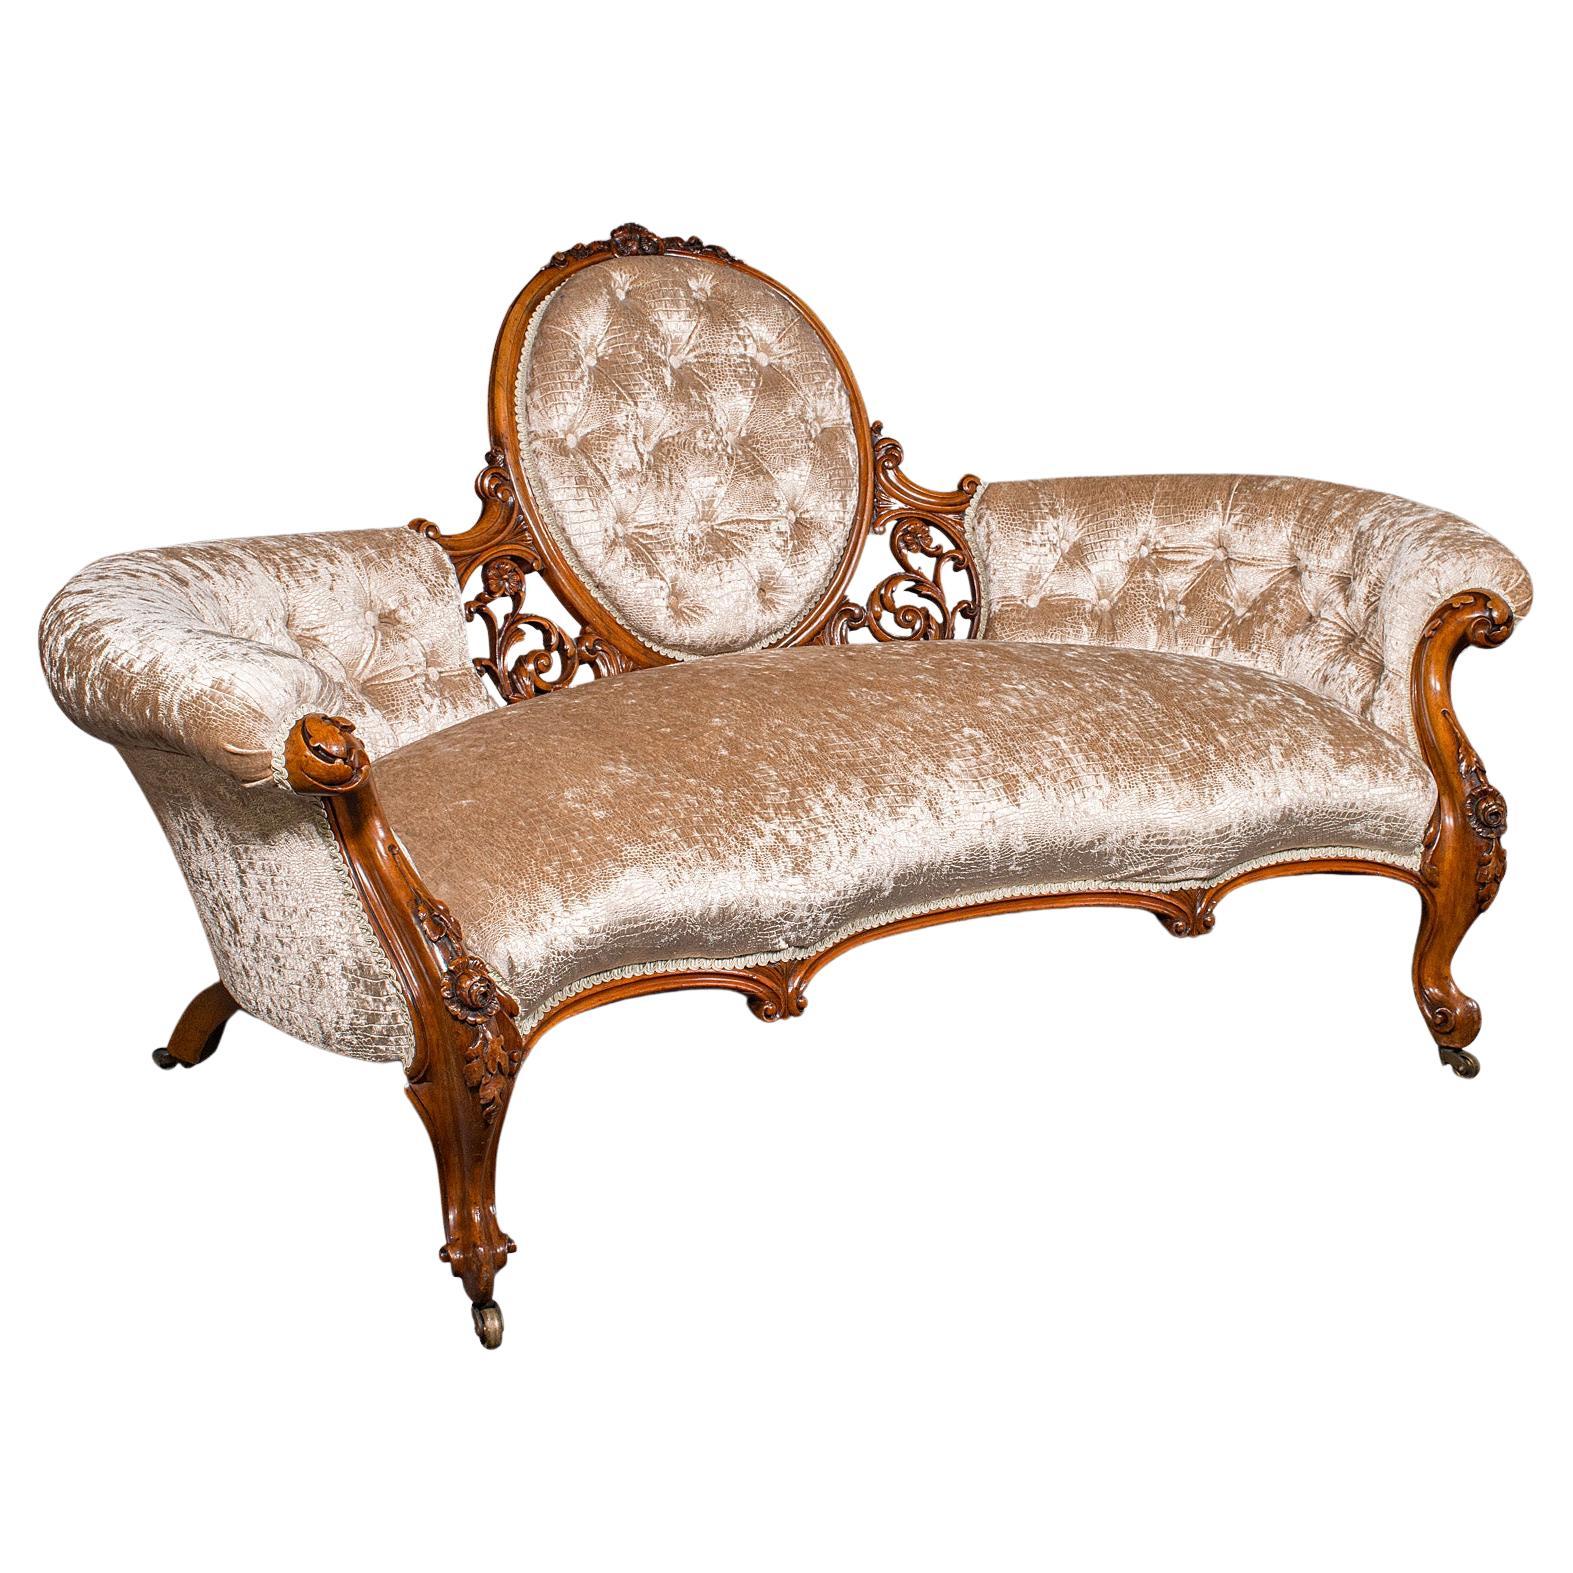 Antique Carved Spoon Back Settee, English, Walnut, Showpiece Sofa, Victorian For Sale